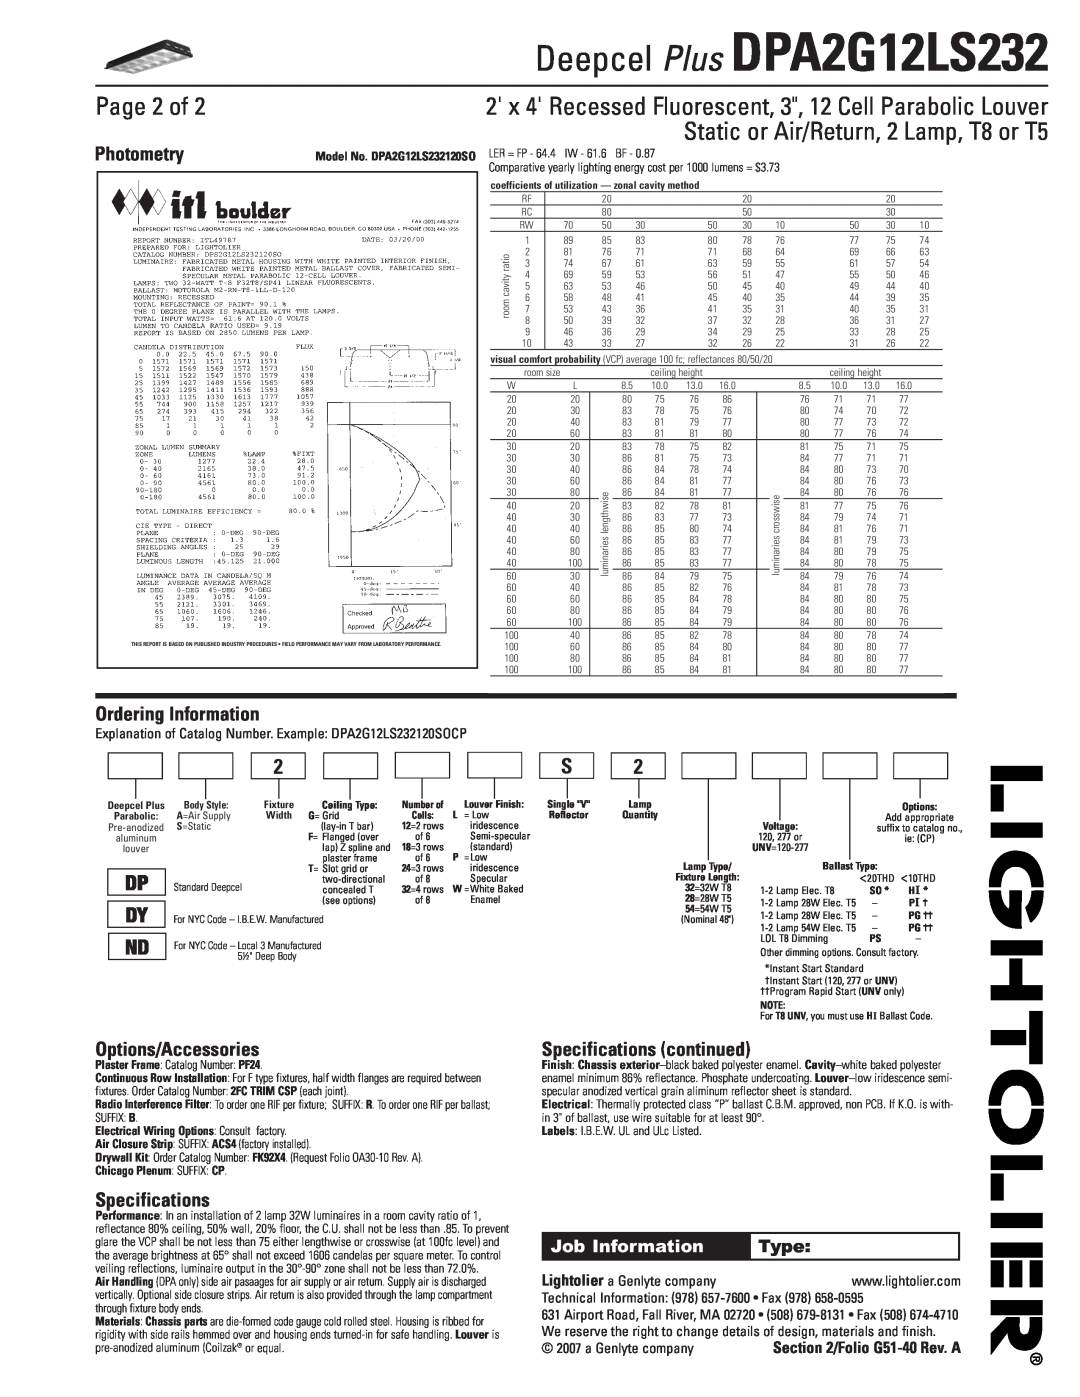 Lightolier DPA2G12LS232 Page 2 of, Photometry, Ordering Information, Options/Accessories, Specifications, Dp Dy Nd, Type 